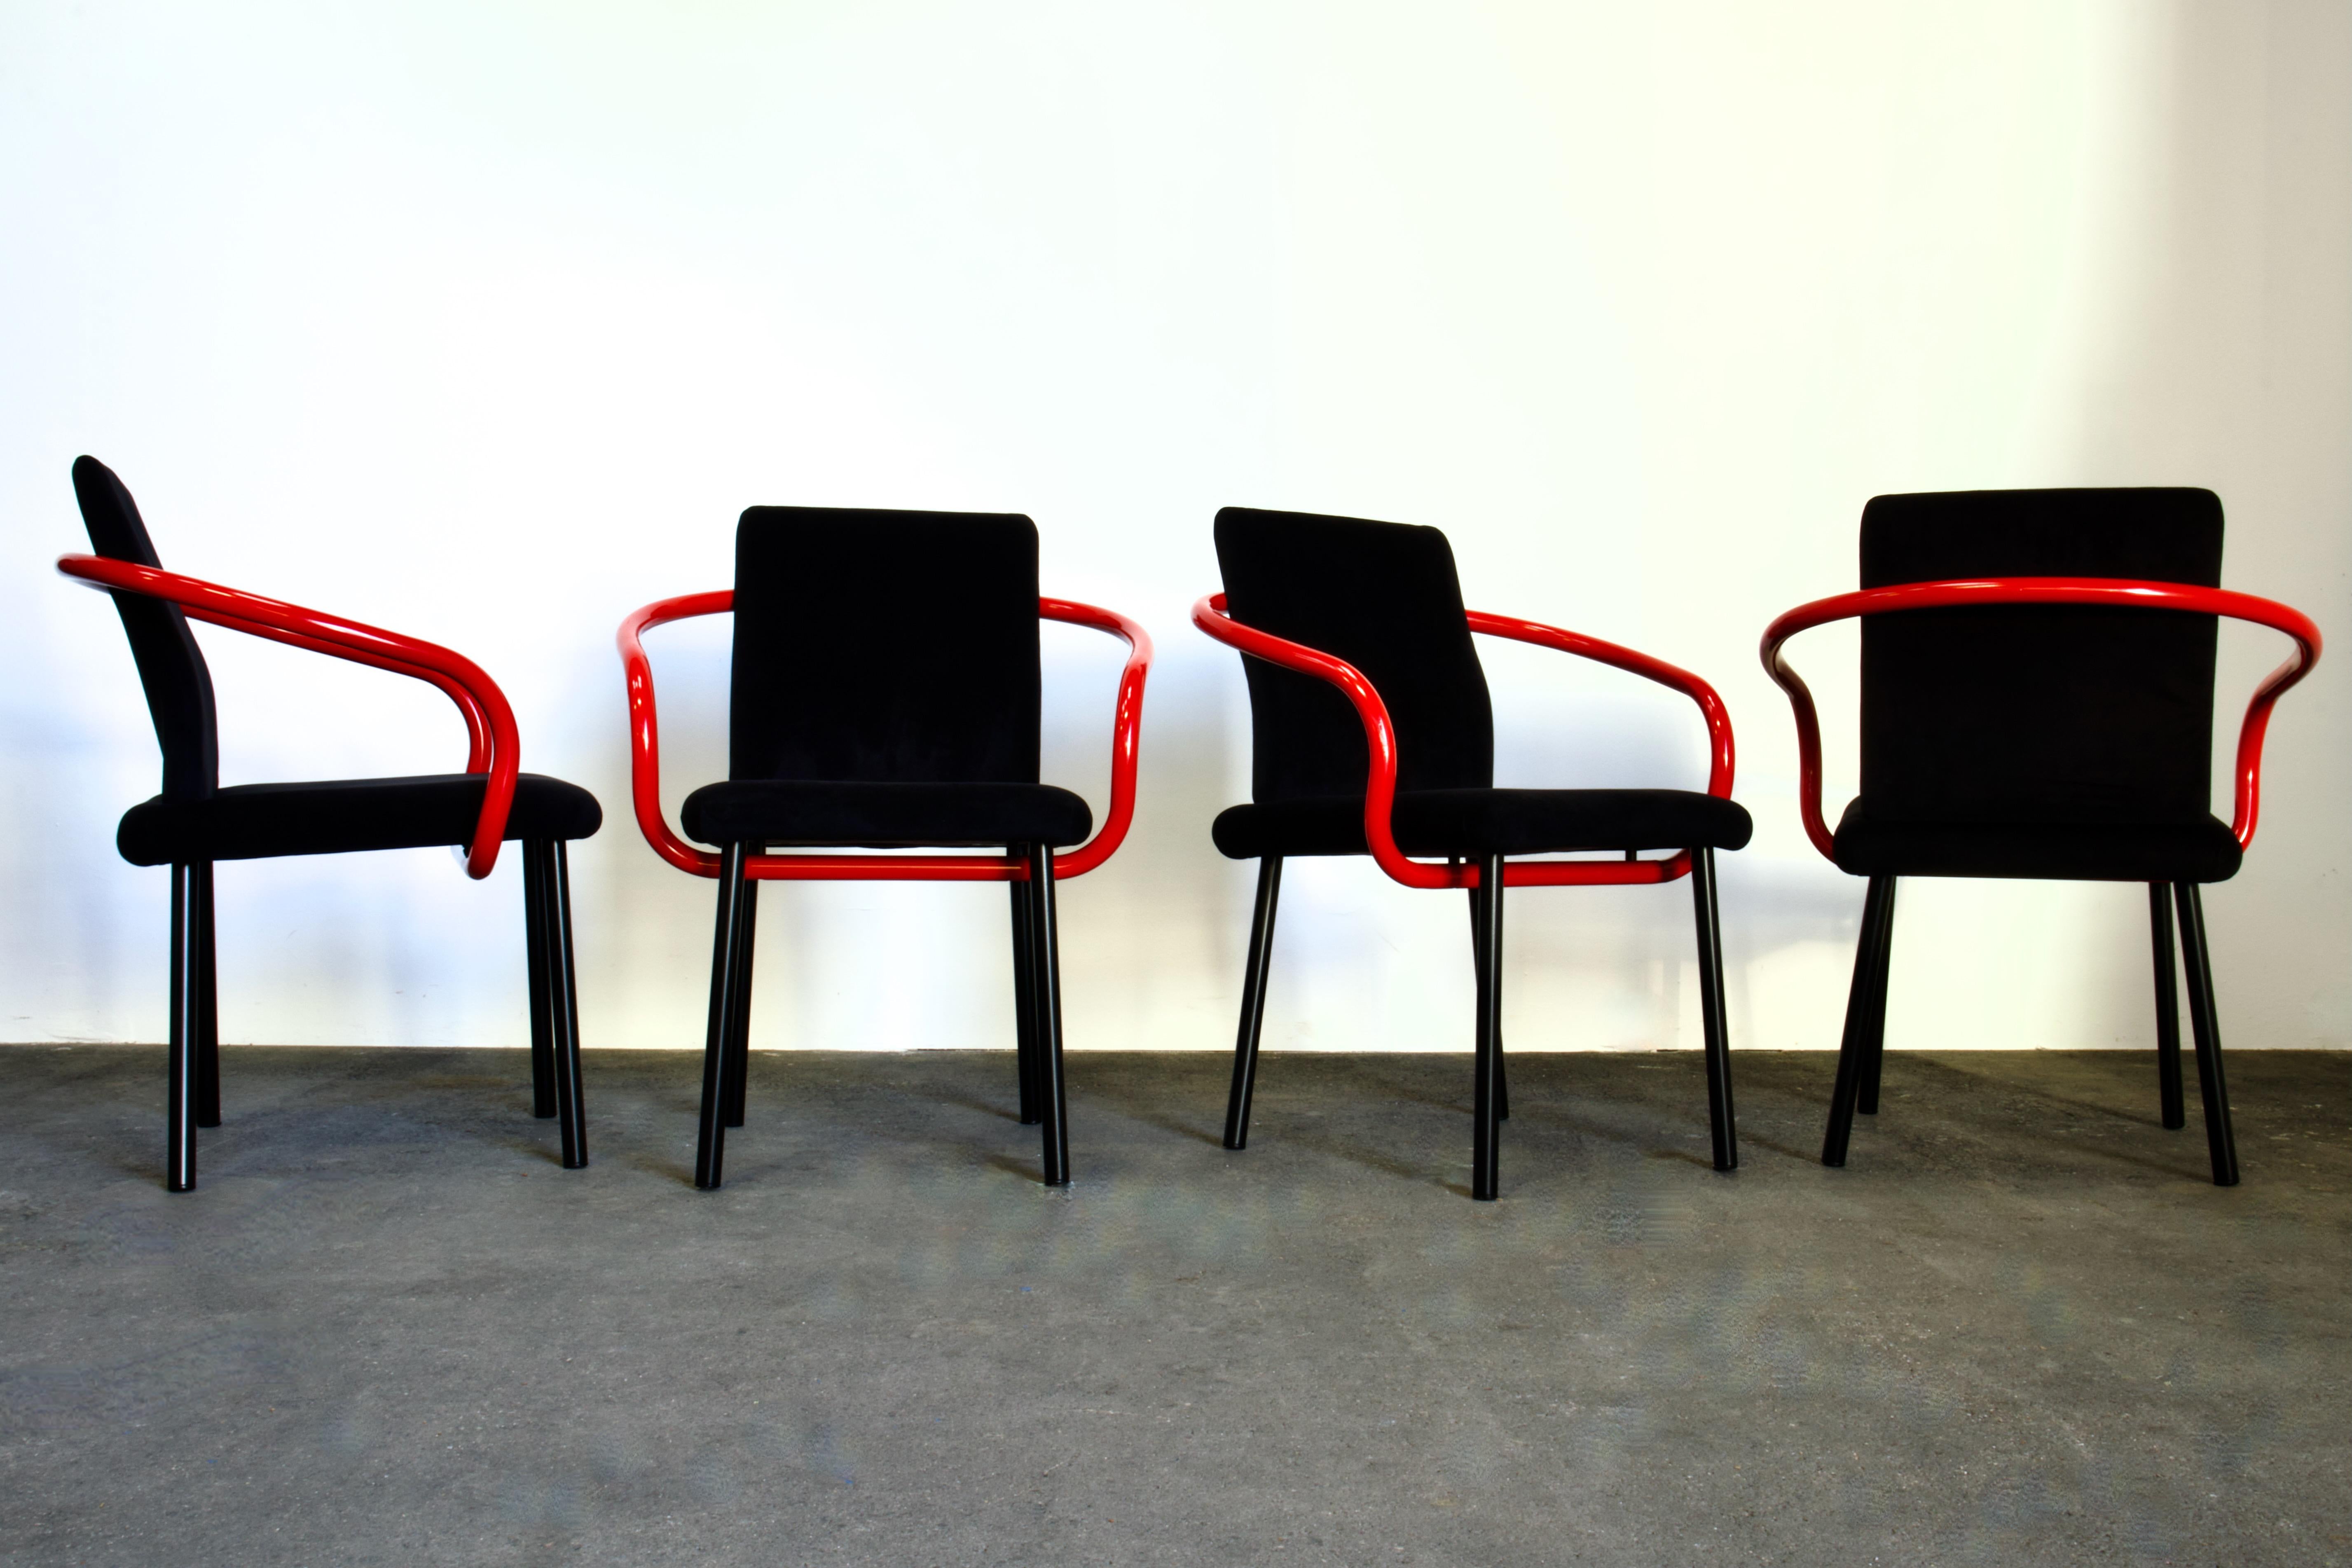 Ettore Sottsass Mandarin Dining Set in Carrara Marble, Red & Black, 1986 Italy For Sale 10